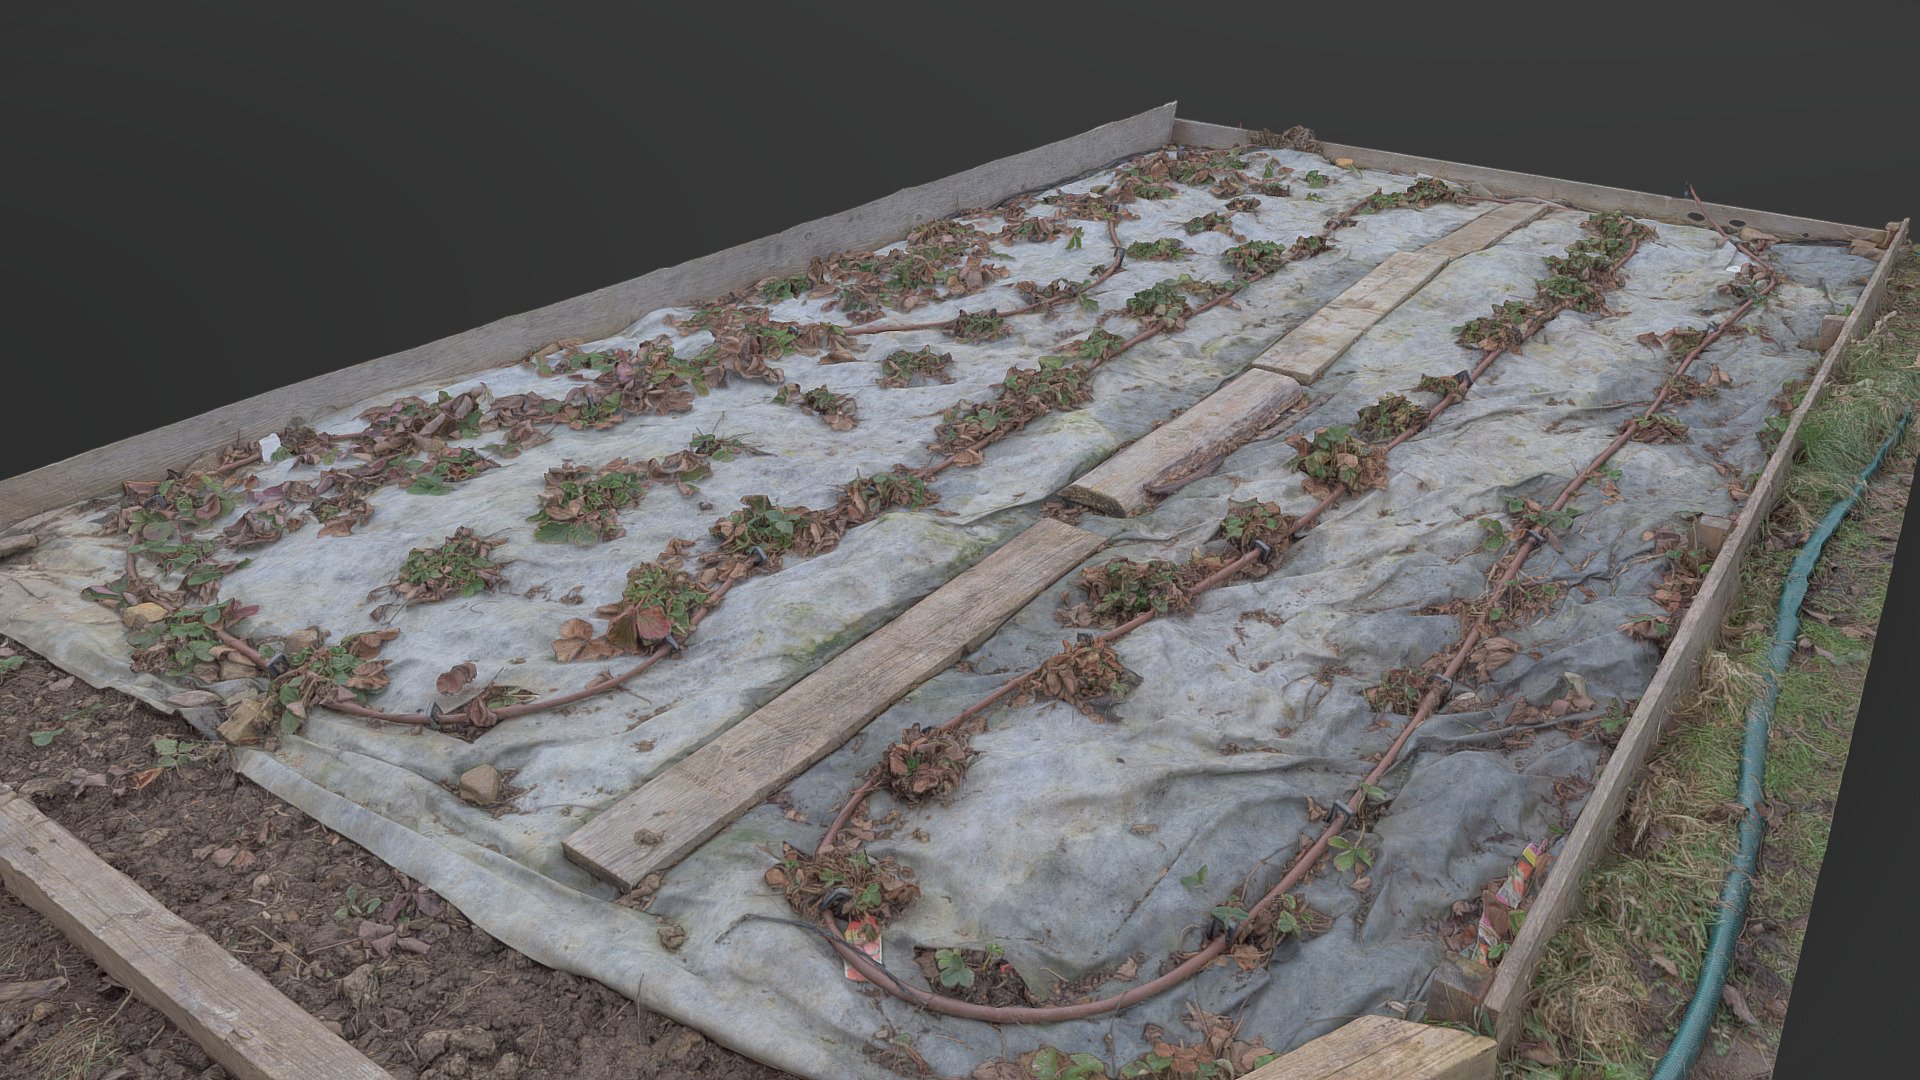 Organic natural Raised strawberry planting growing flower bed soil with water irrigation pipes and manure fertilizer, natural farming gardening production

photogrammetry scan (180x36mp), 4x8k textures + hd normals (as addiional .zip download) - Raised strawberry planting bed - Buy Royalty Free 3D model by matousekfoto 3d model